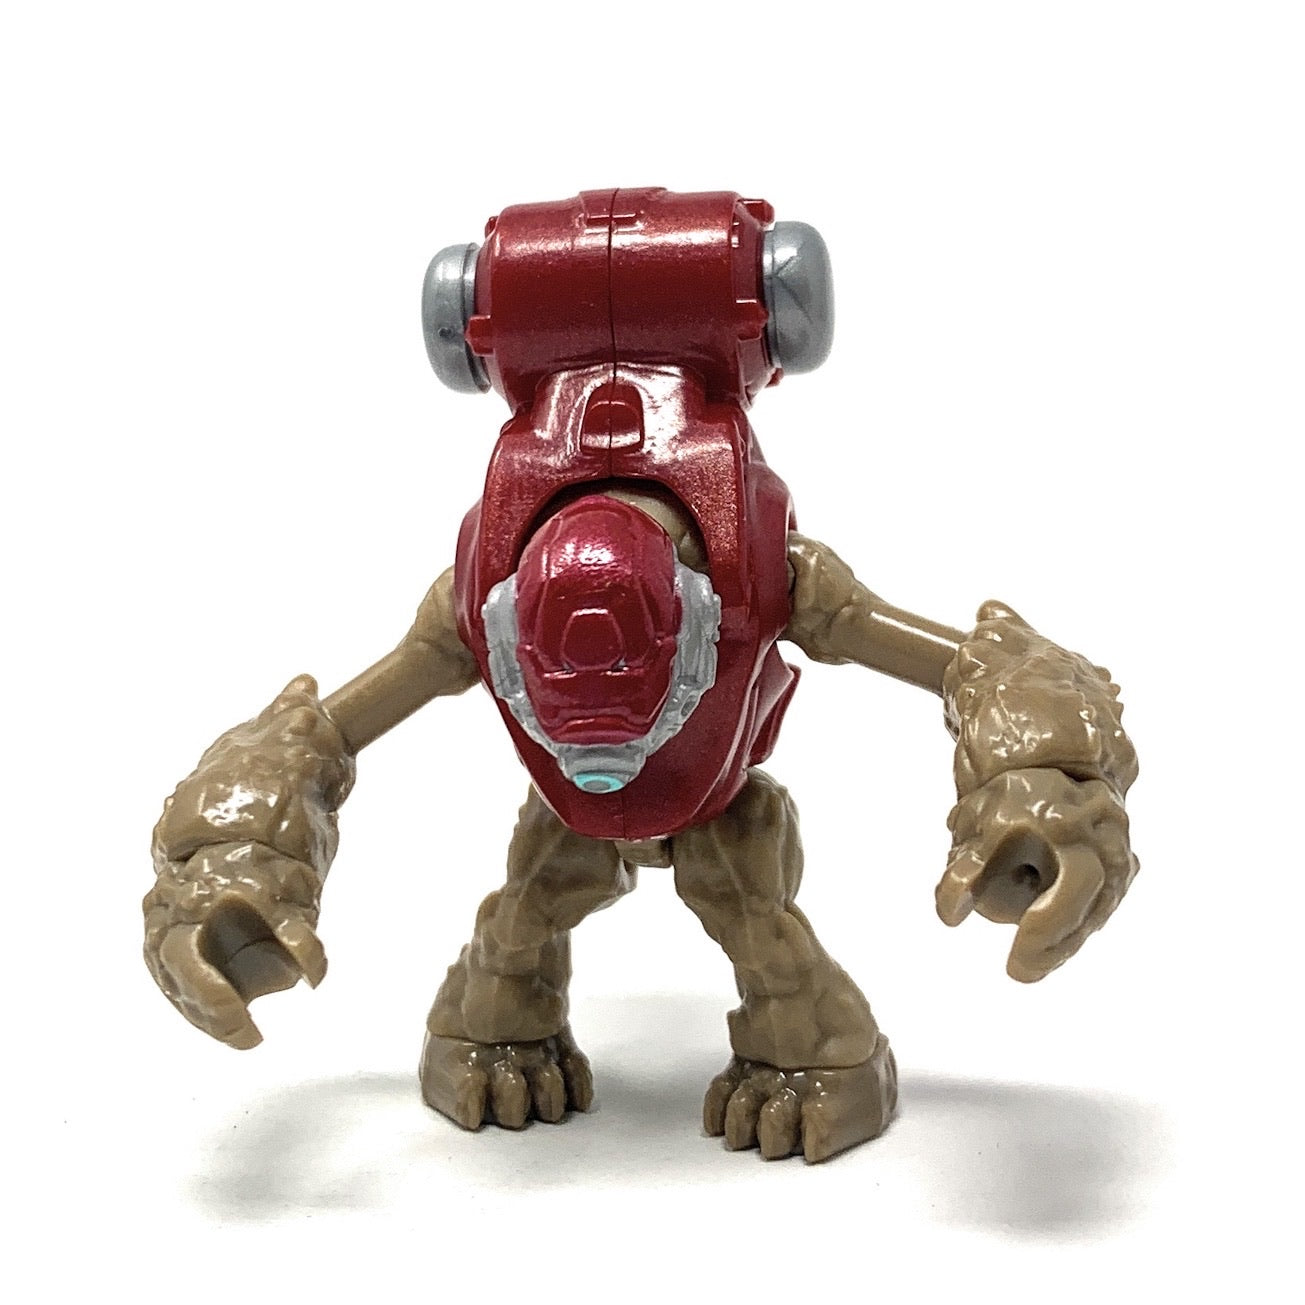 Grunt Imperial (Red Armor, Hijacked) - Mega Construx Halo Micro Figure (2020) [LOOSE]